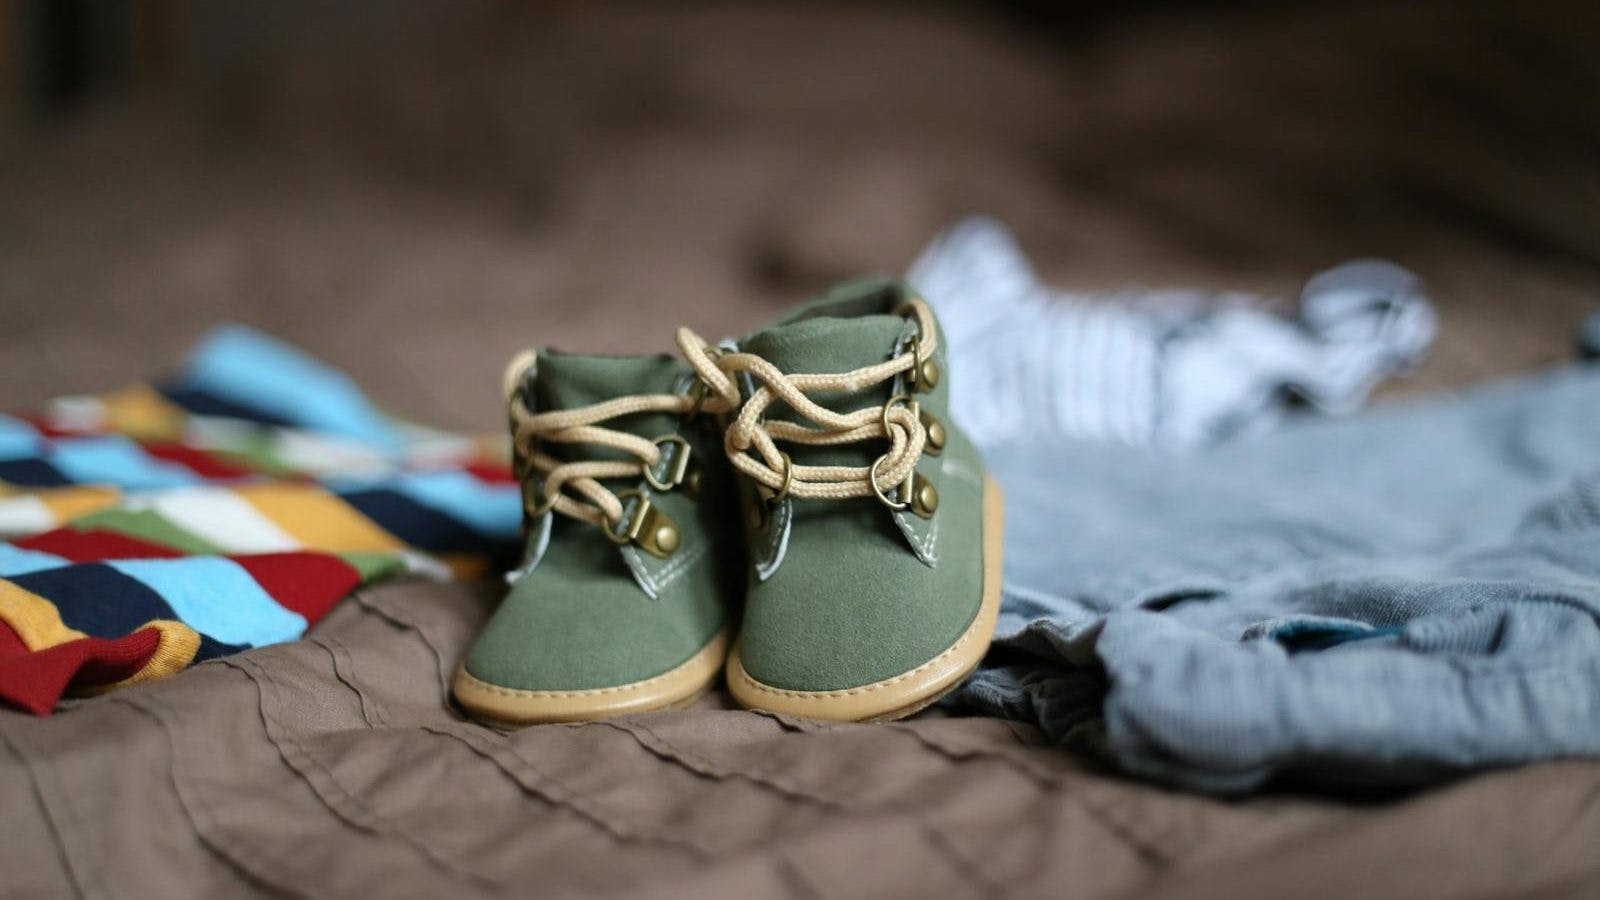 Baby's Green and Beige Sneakers on Brown Textile